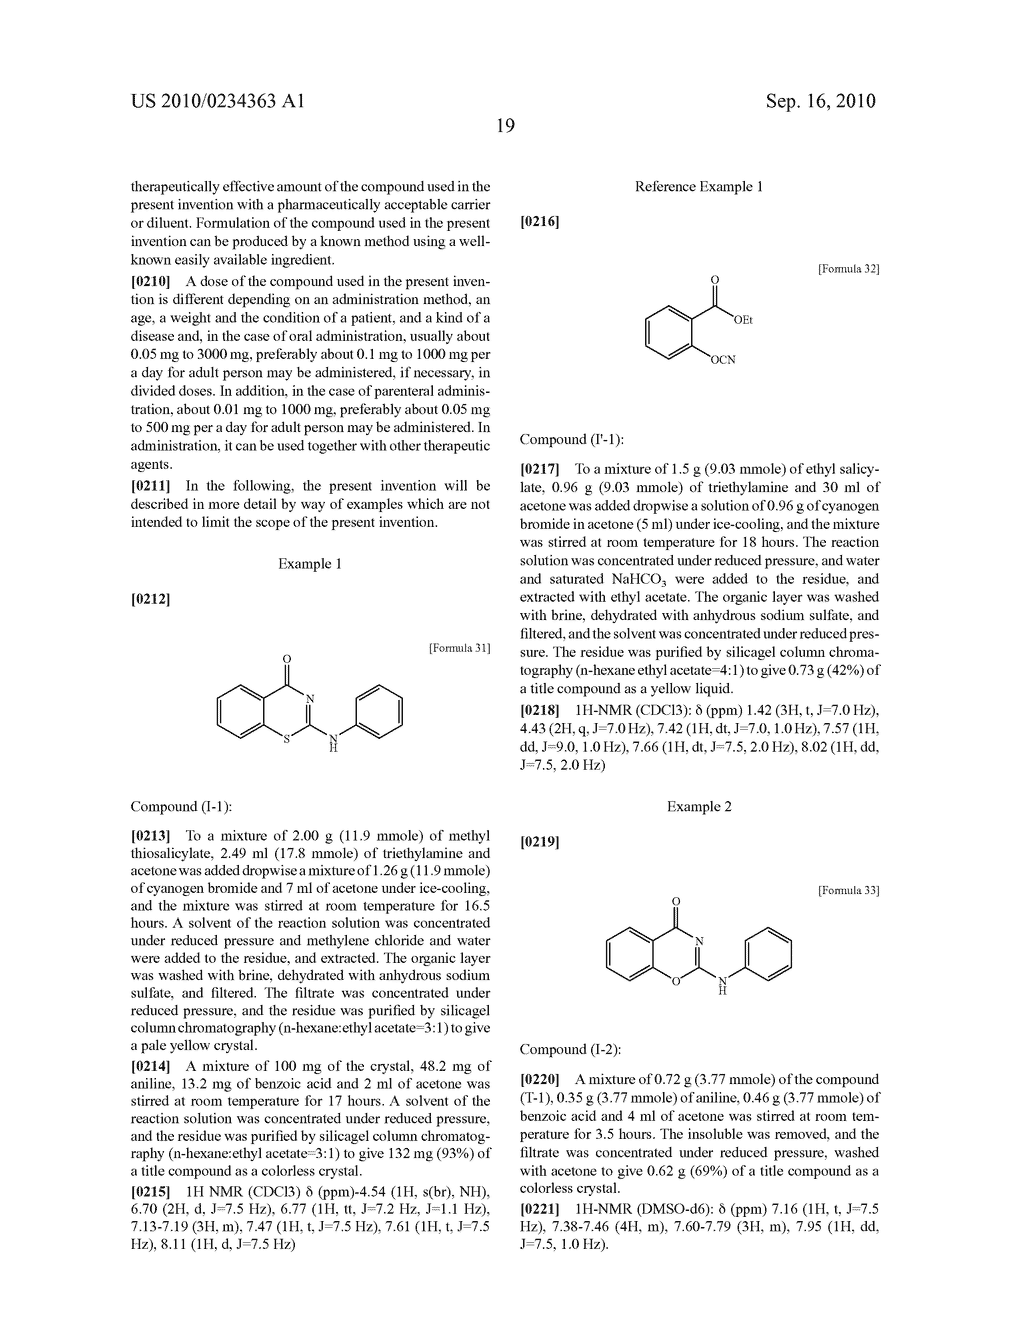 HETEROCYCLIC DERIVATIVE HAVING INHIBITORY ACTIVITY ON TYPE-I 11 DATA-HYDROXYSTEROID DEHYDROGENASE - diagram, schematic, and image 20